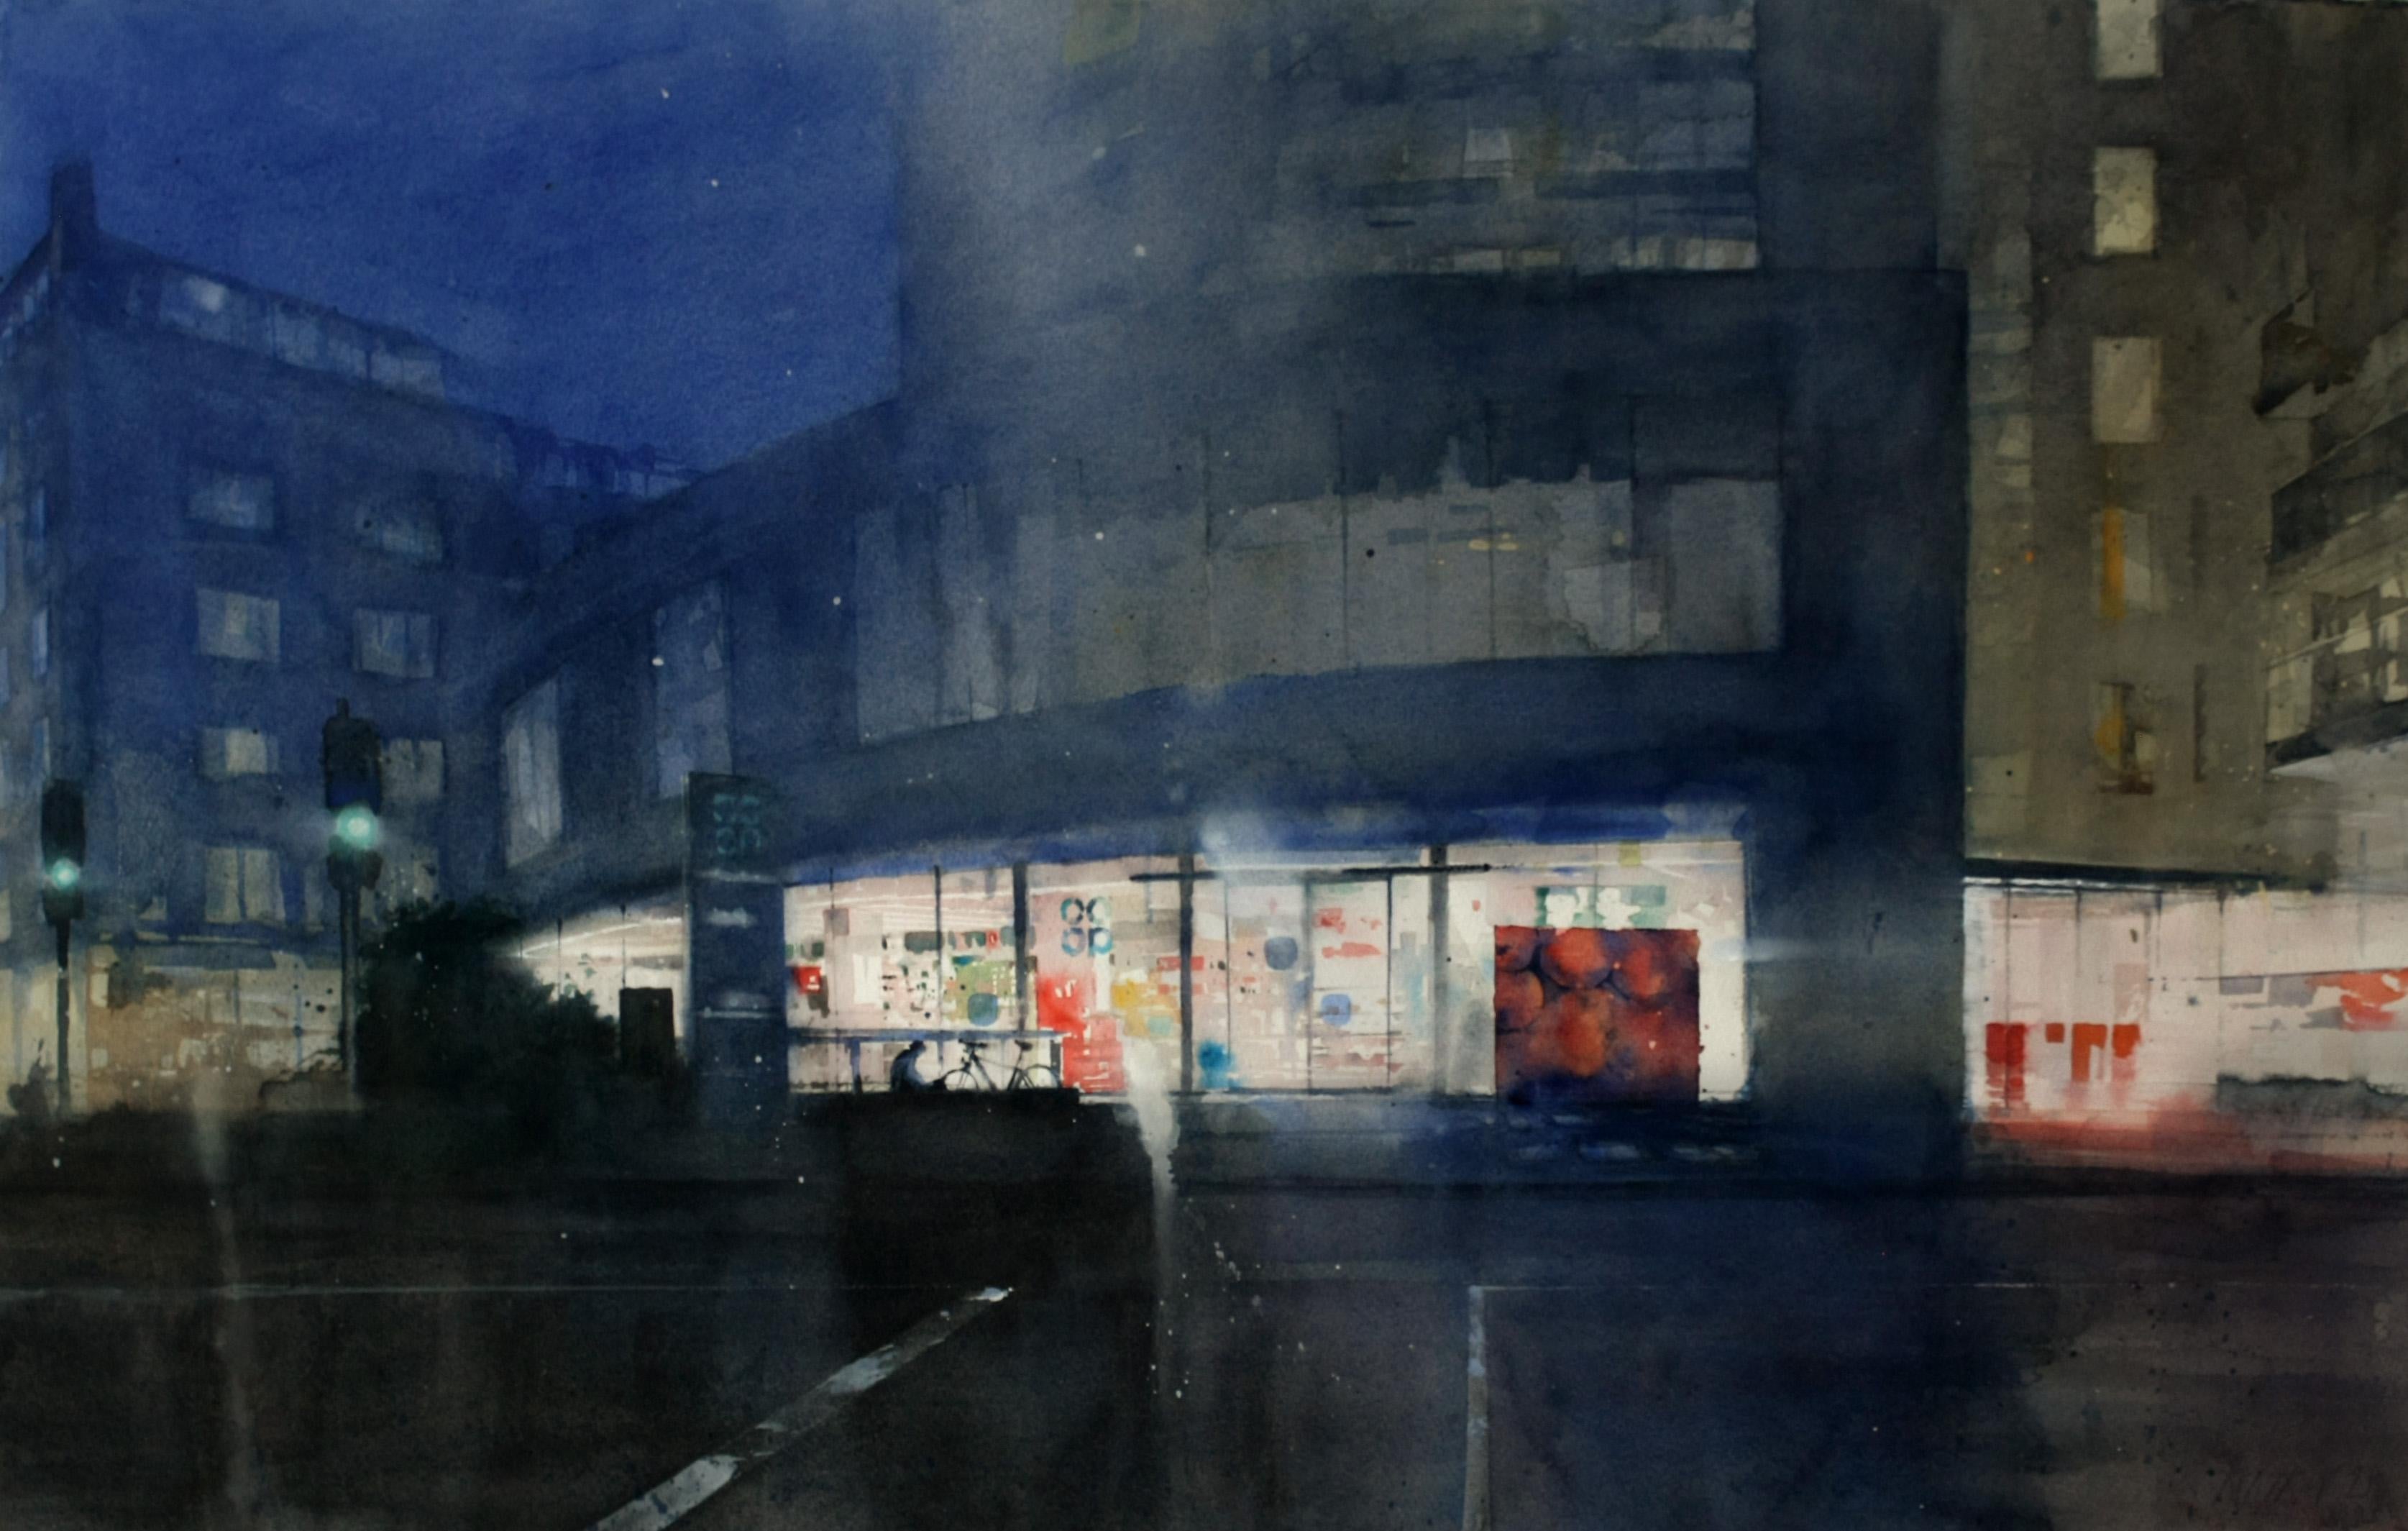 Opening time - contemporary watercolour architecture London night street